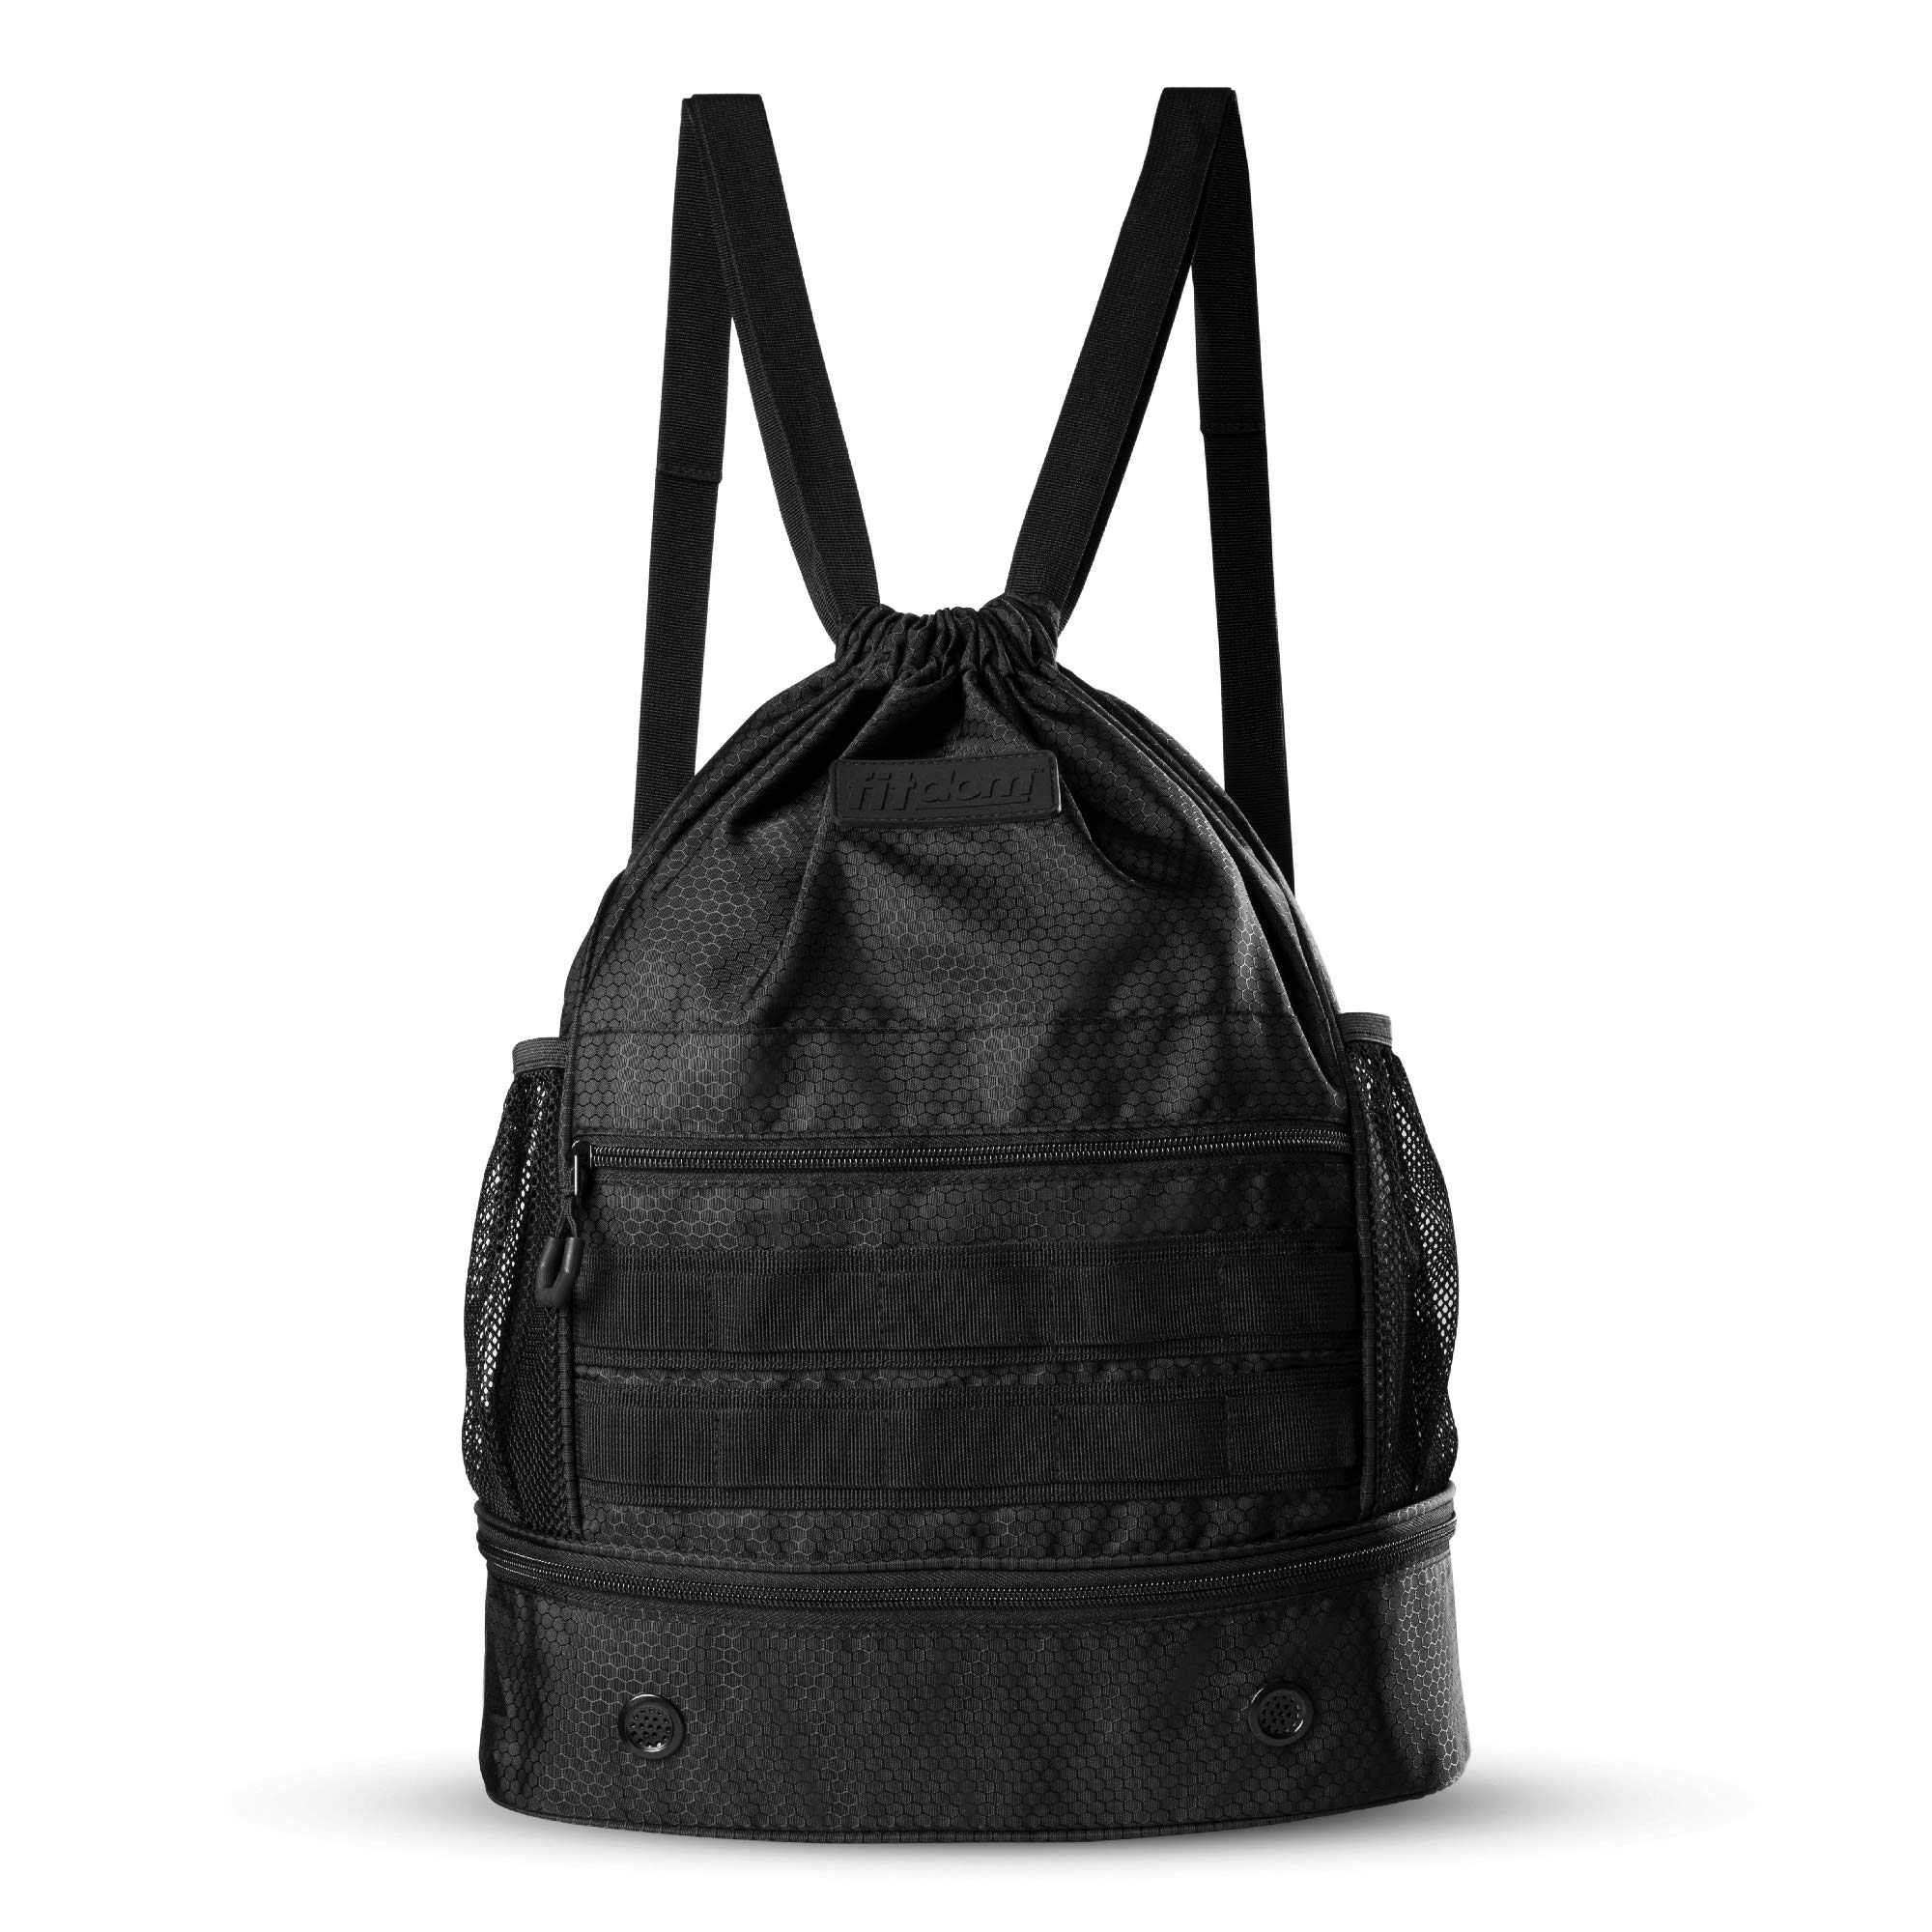 Drawstring bag for Tactical design sports belt level suitable for men and women Featured Image